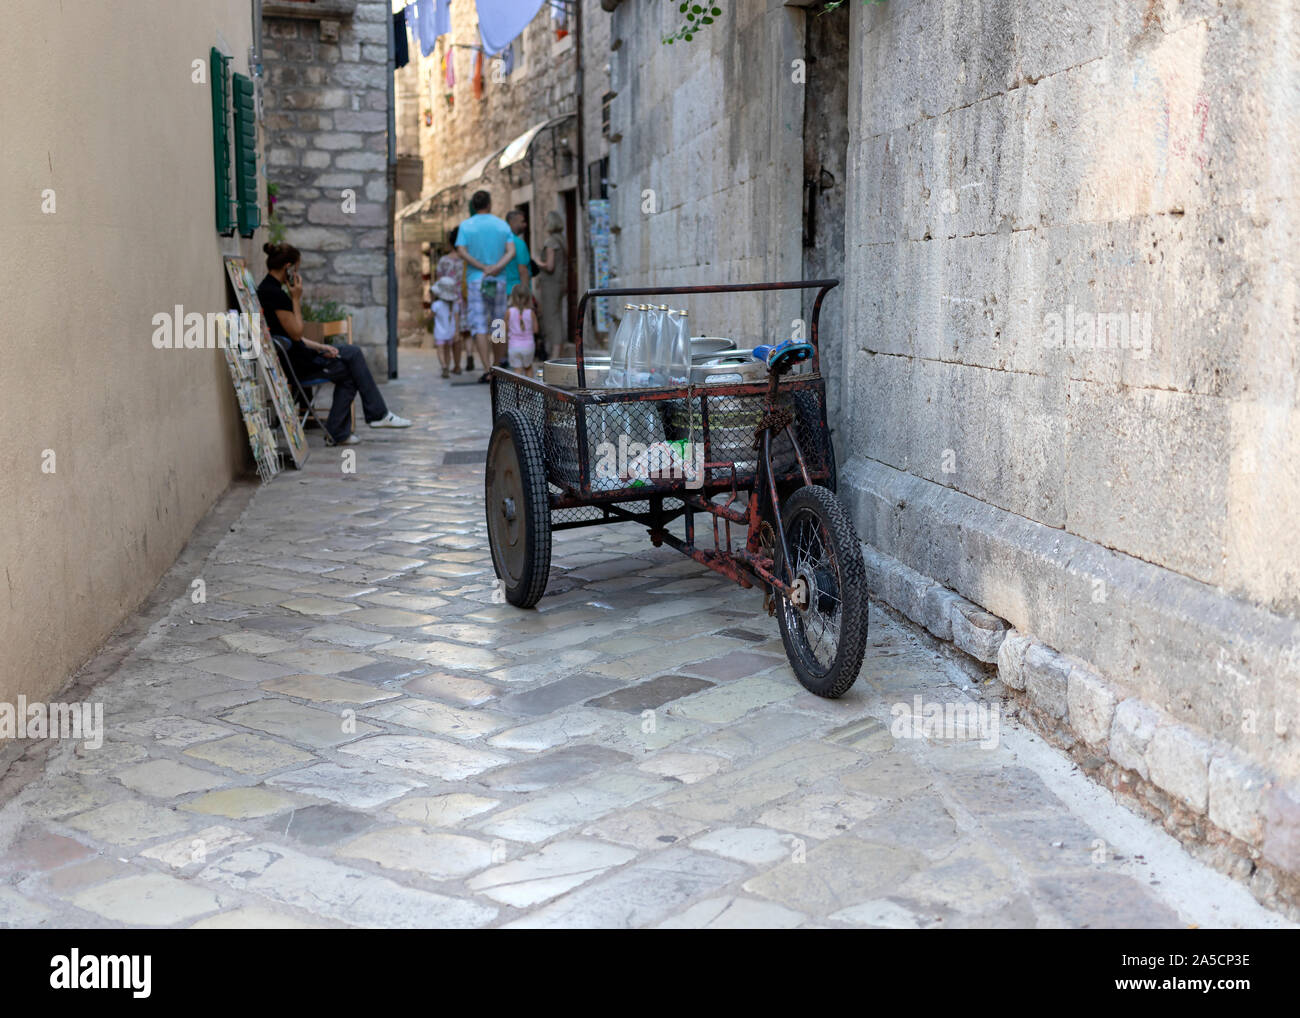 Montenegro, Sep 16, 2019: Delivery tricycle parked on the street in old town of Kotor Stock Photo